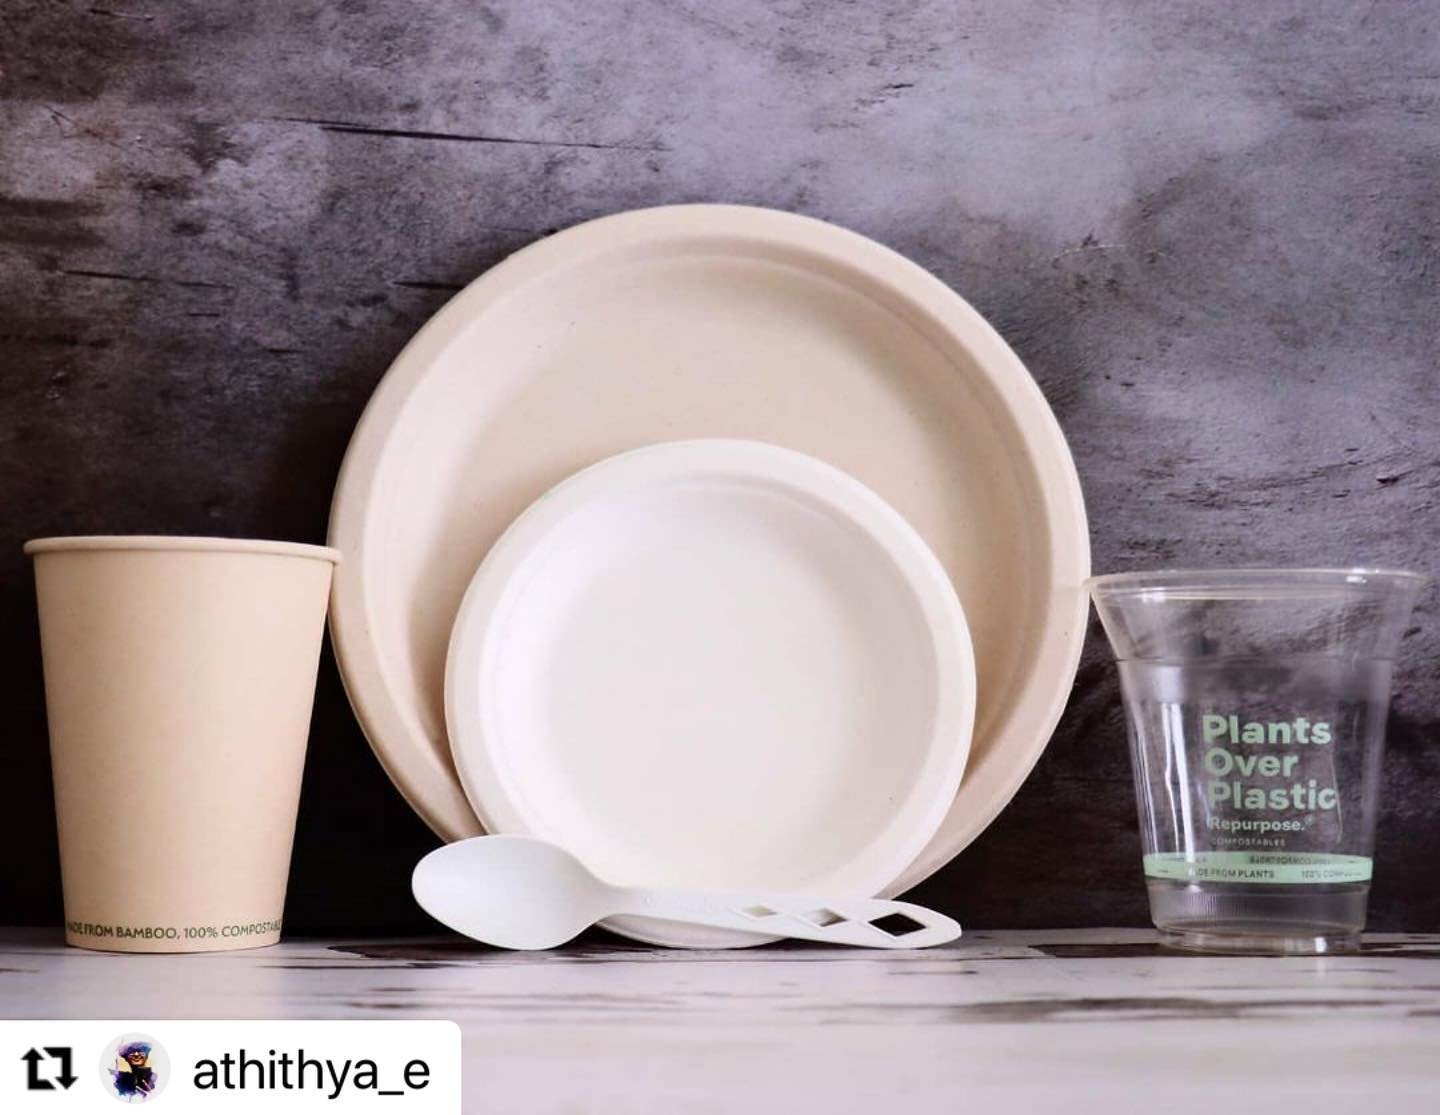 Happy birthday to your son!!🎊🎁 
And thank you! for choosing environmentally friendly products and hope you enjoy our premium eco friendly products as we do!
#Repost @athithya_e 
・・・

நம் பூமி மேலே புது பார்வை கொள்க!
நம் இயற்கை மேல் இன்னும் இச்சை கொ